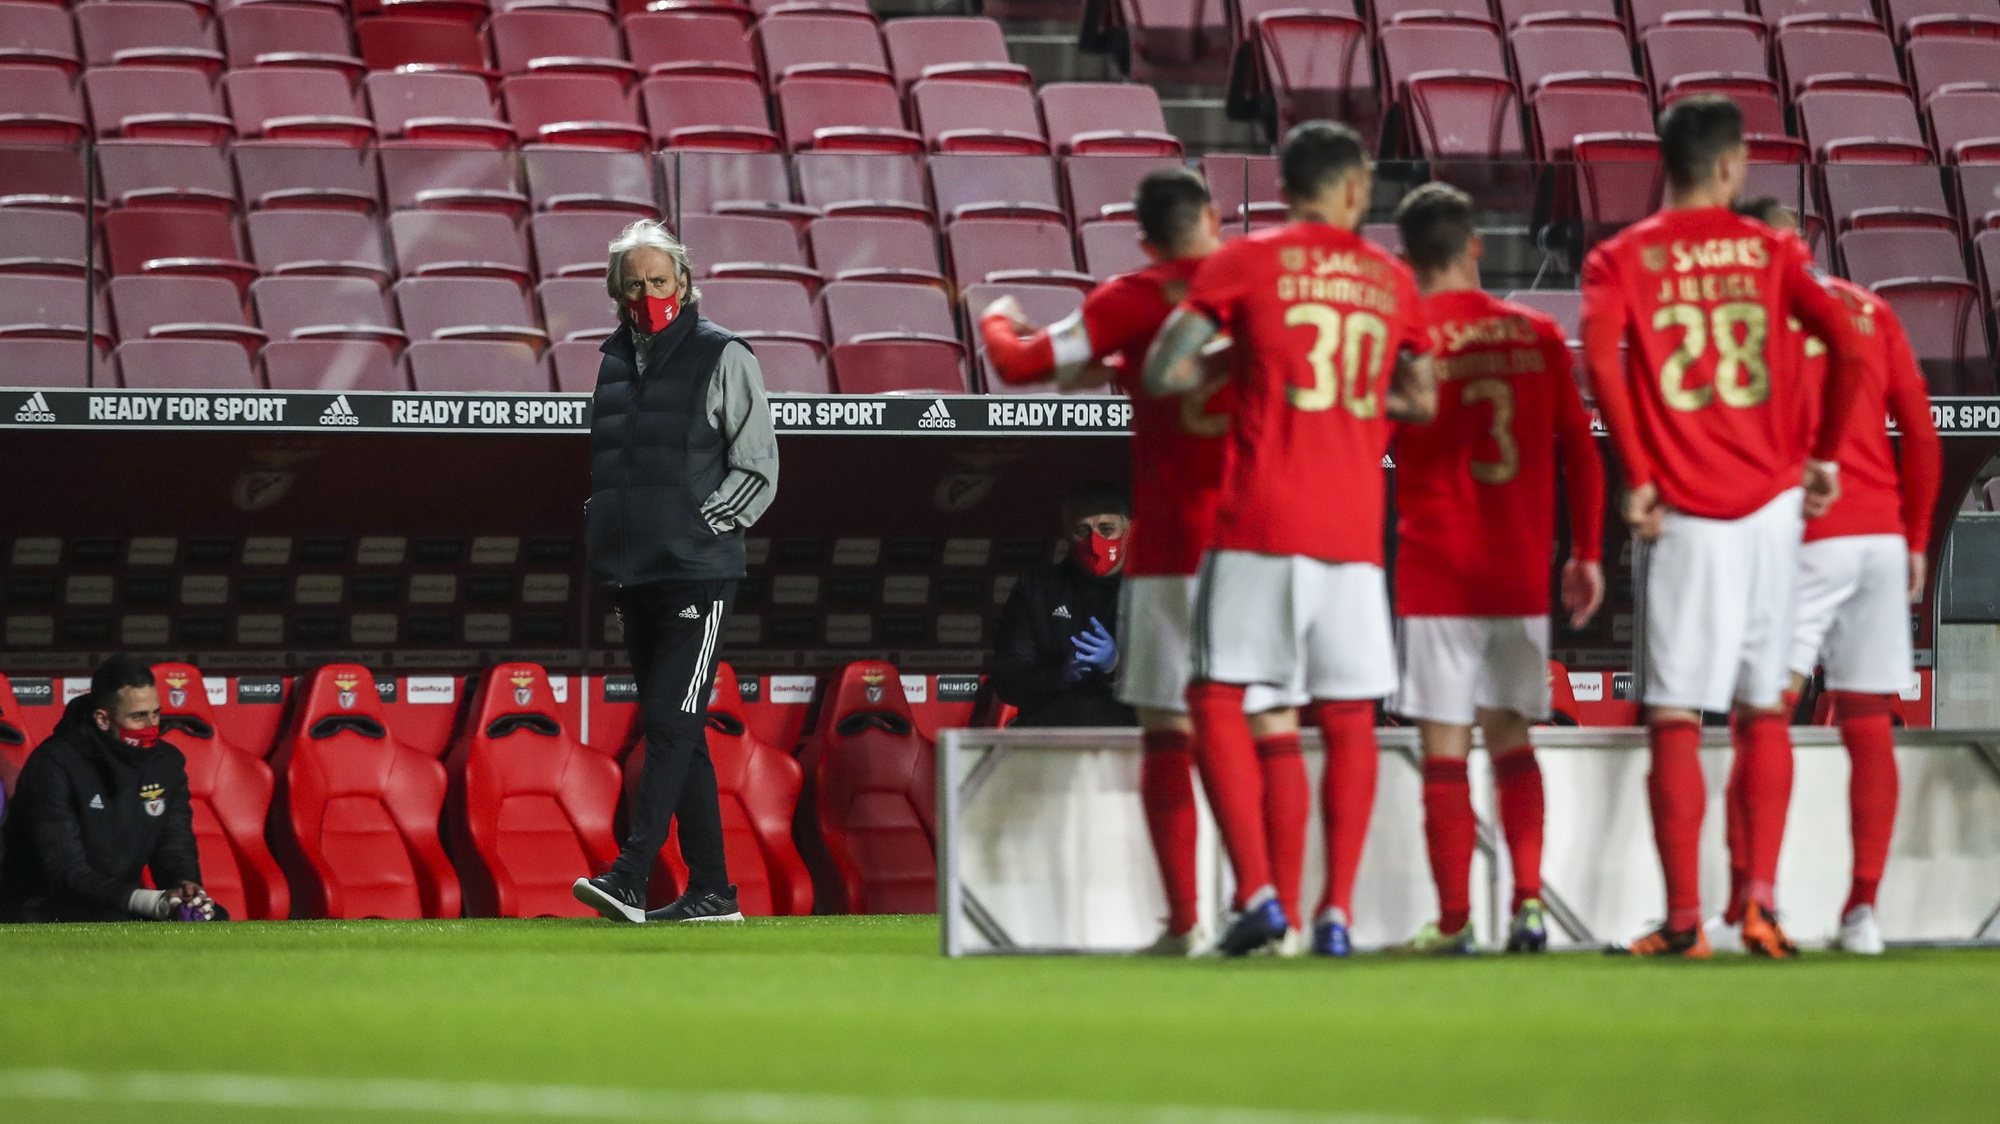 Benfica head coach Jorge Jesus (L) reacts prior to the Portuguese First League Soccer match between Benfica and Tondela held at Luz Stadium in Lisbon, Portugal, 08 January 2021. JOSE SENA GOULAO/LUSA